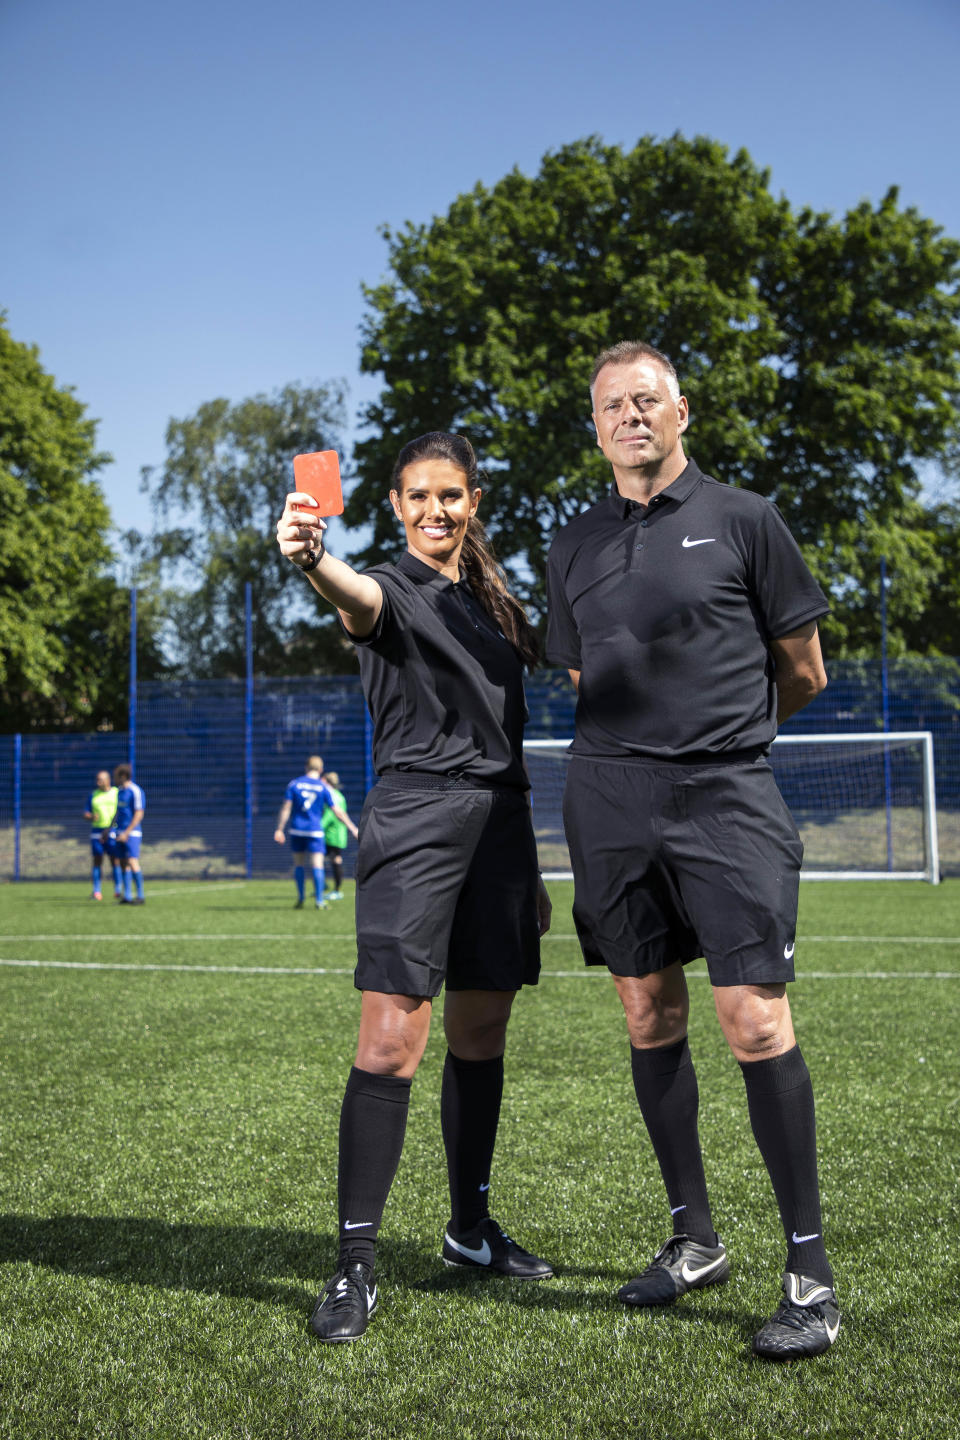 Mark Halsey put Rebekah through her paces at Leicester City’s training ground